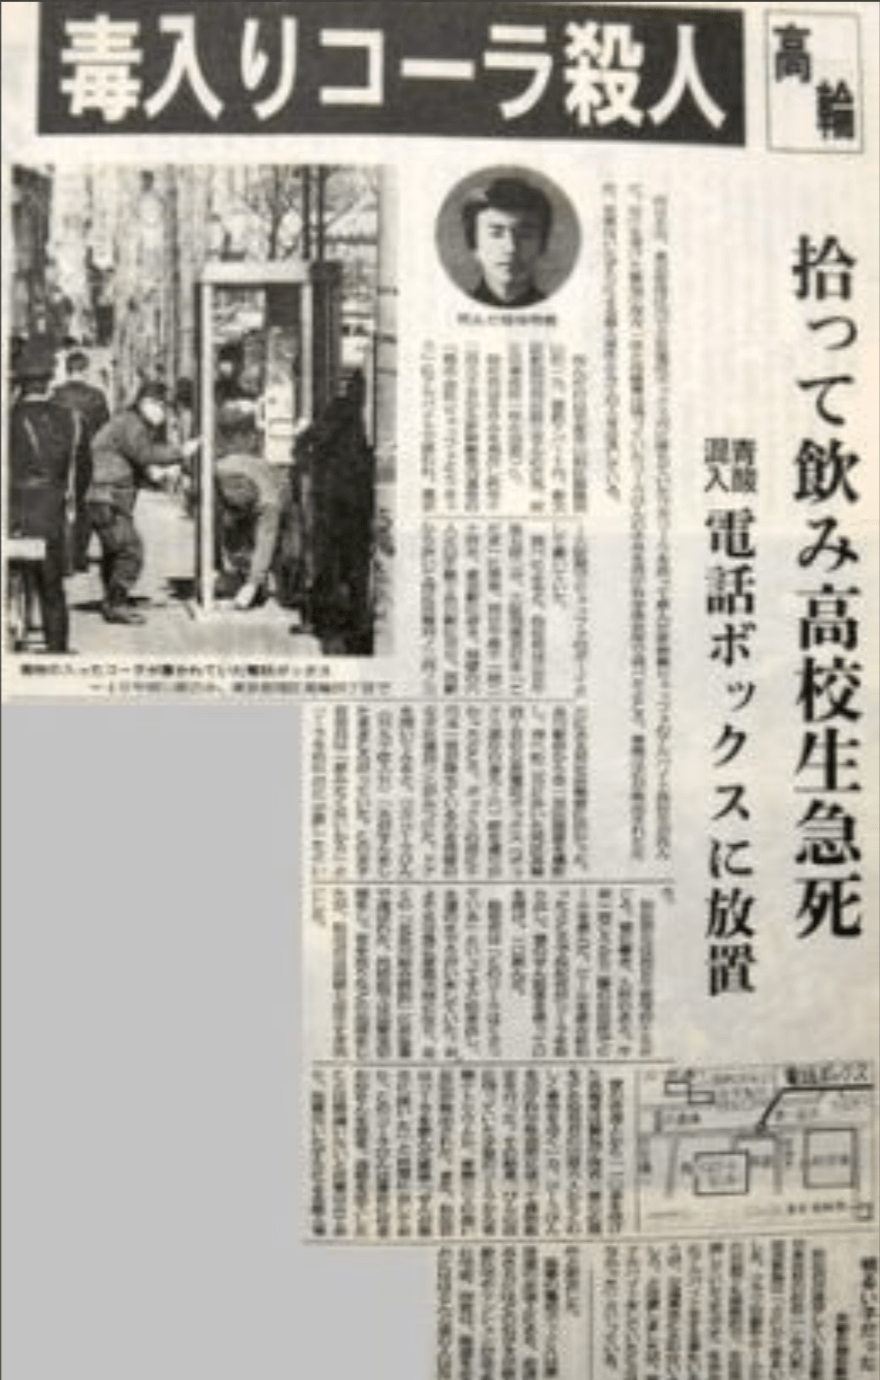 unsolved mysteries in Japan - news report on death